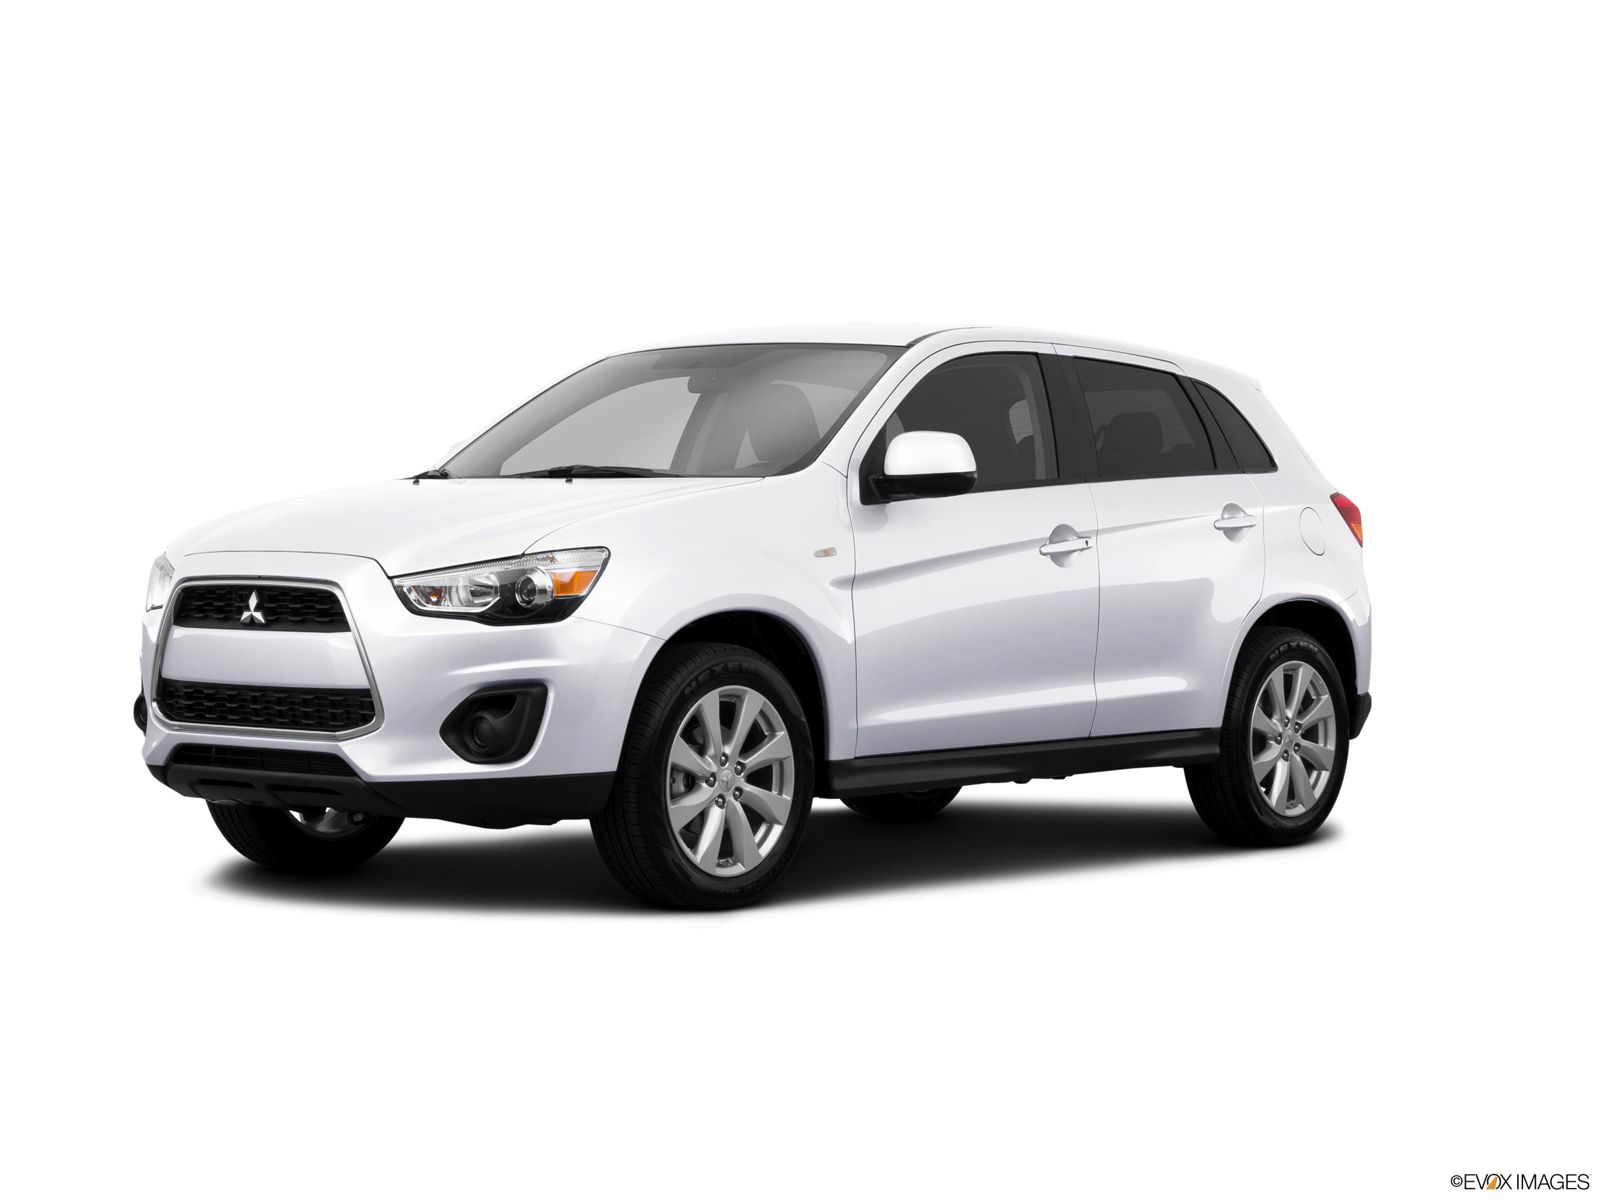 2015 Mitsubishi Outlander Sport Research, Photos, Specs and Expertise |  CarMax